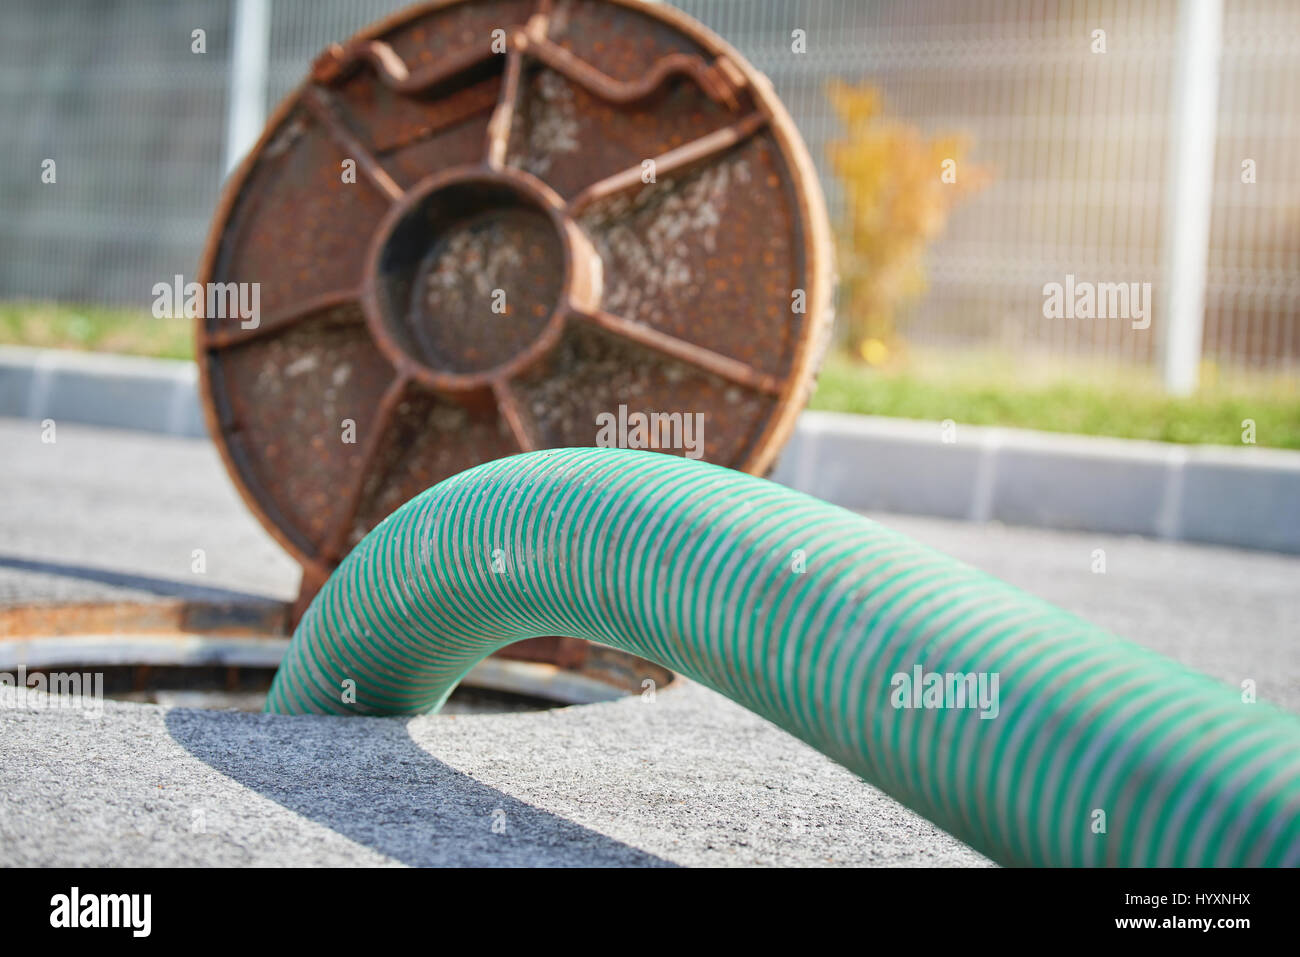 Emptying septic tank, cleaning the sewers Septic cleaning and sewage removal. Emptying household septic tank. Cleaning sludge from septic system. Stock Photo